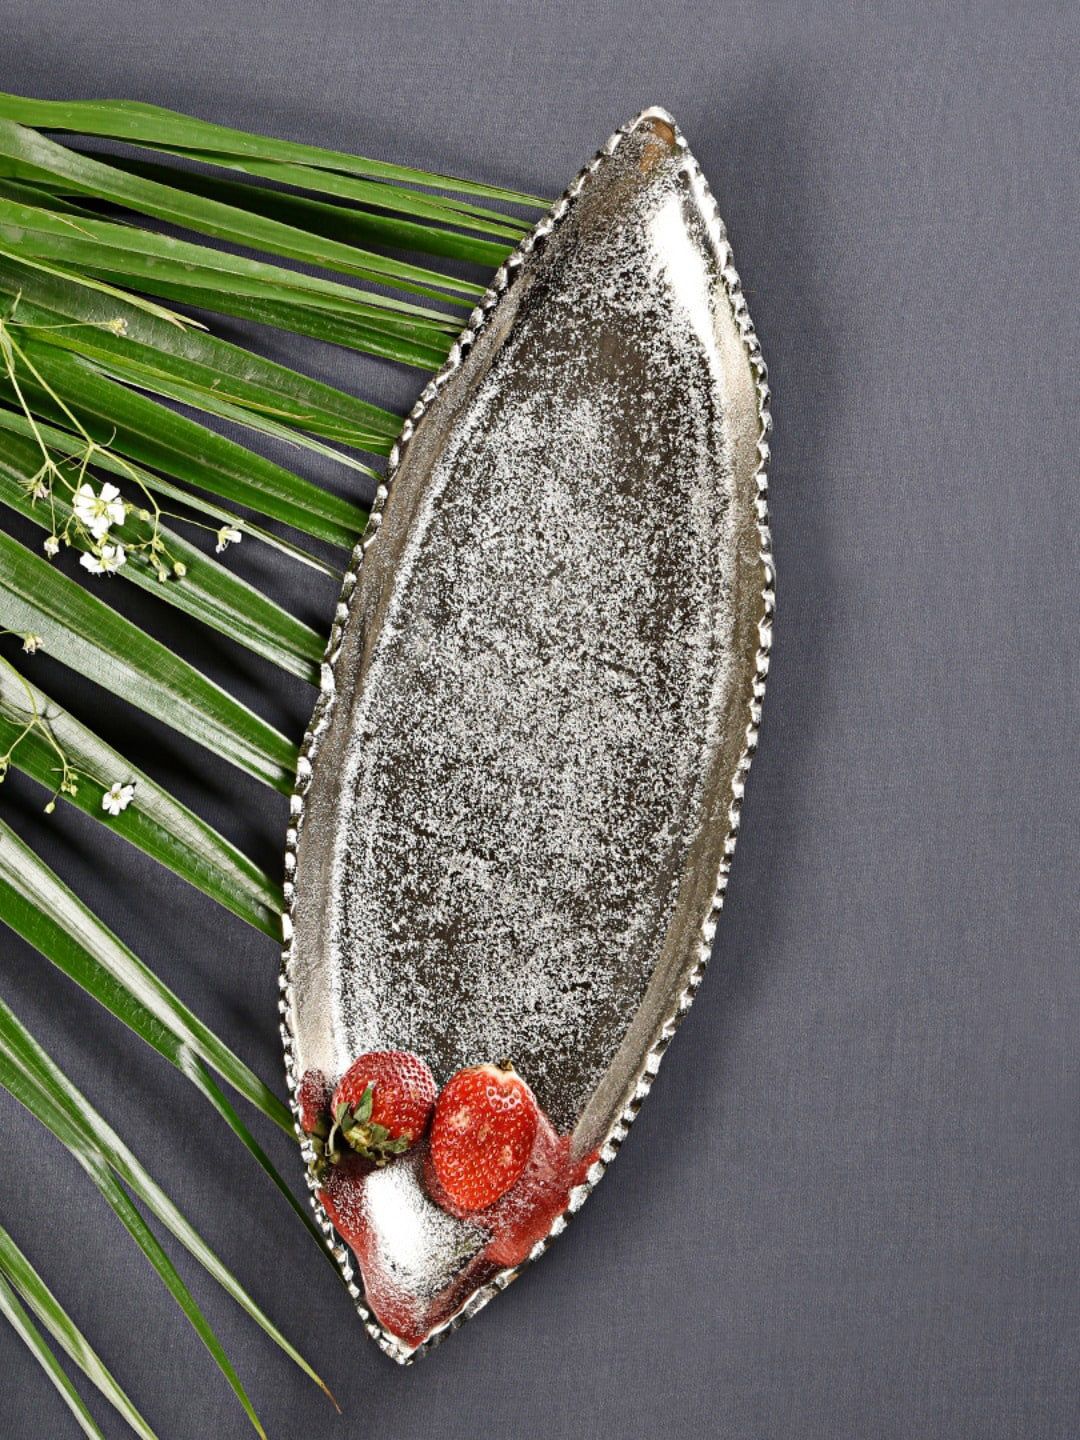 The 7 DeKor Silver-Toned Solid Leaf Serveware Price in India